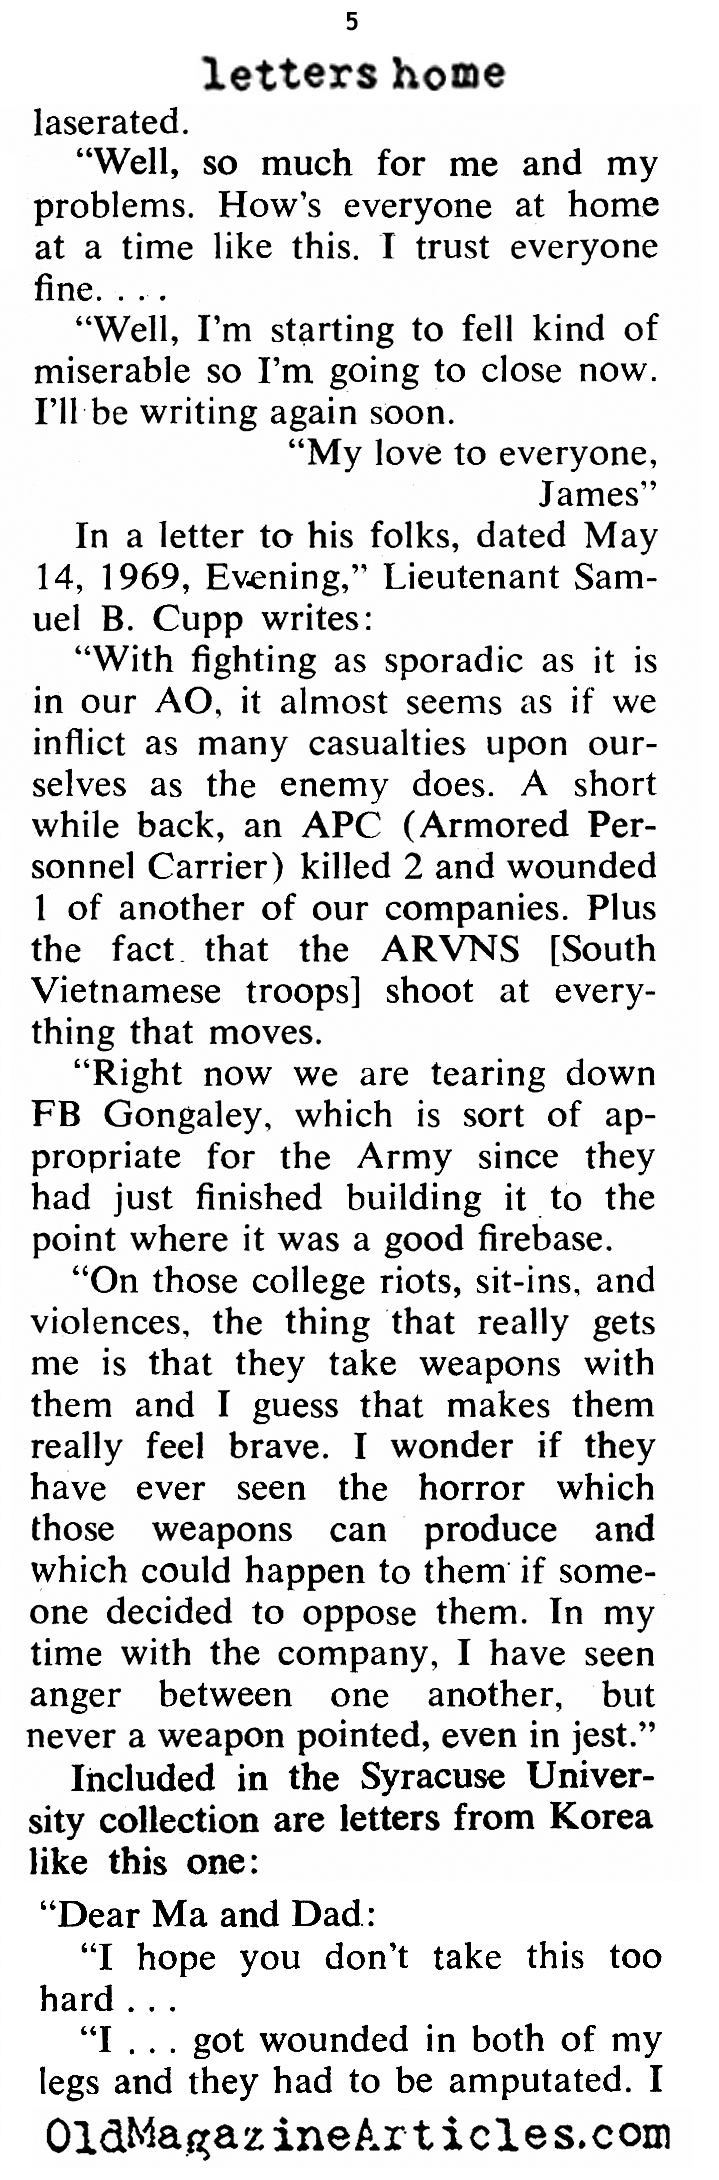 More Letters From Vietnam (Coronet Magazine, 1970)